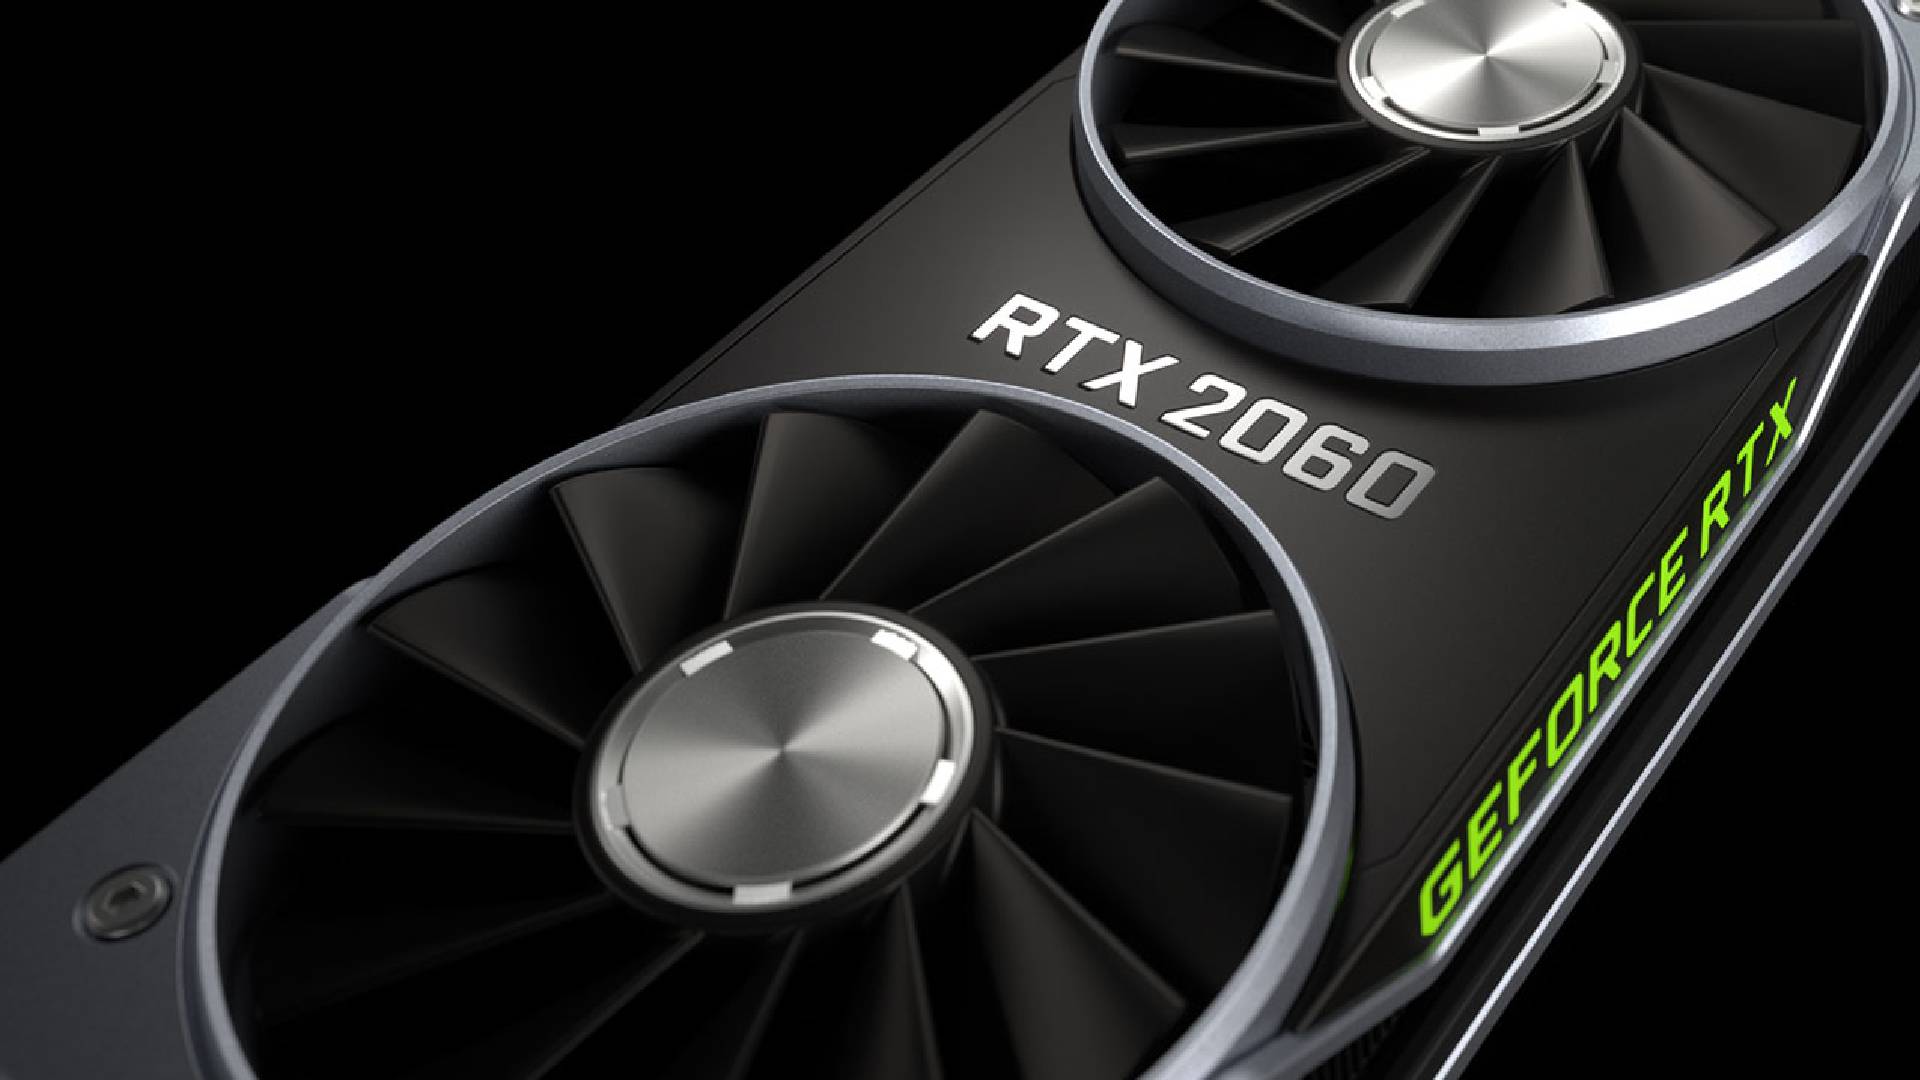 Nvidia’s new RTX 2060 12GB officially debuts this month, but at a higher cost